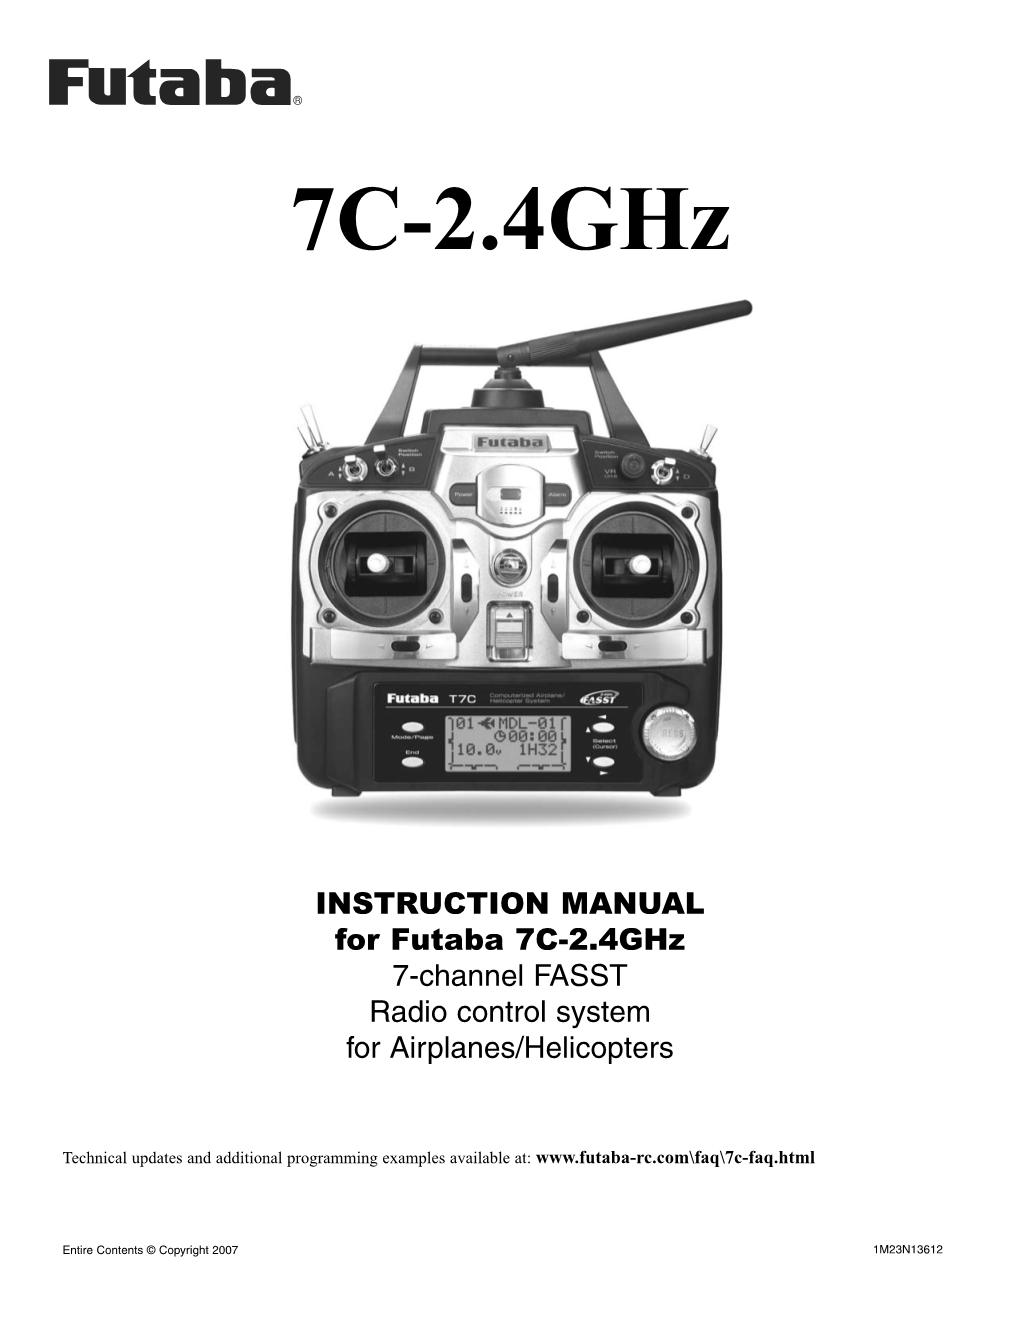 INSTRUCTION MANUAL for Futaba 7C-2.4Ghz 7-Channel FASST Radio Control System for Airplanes/Helicopters